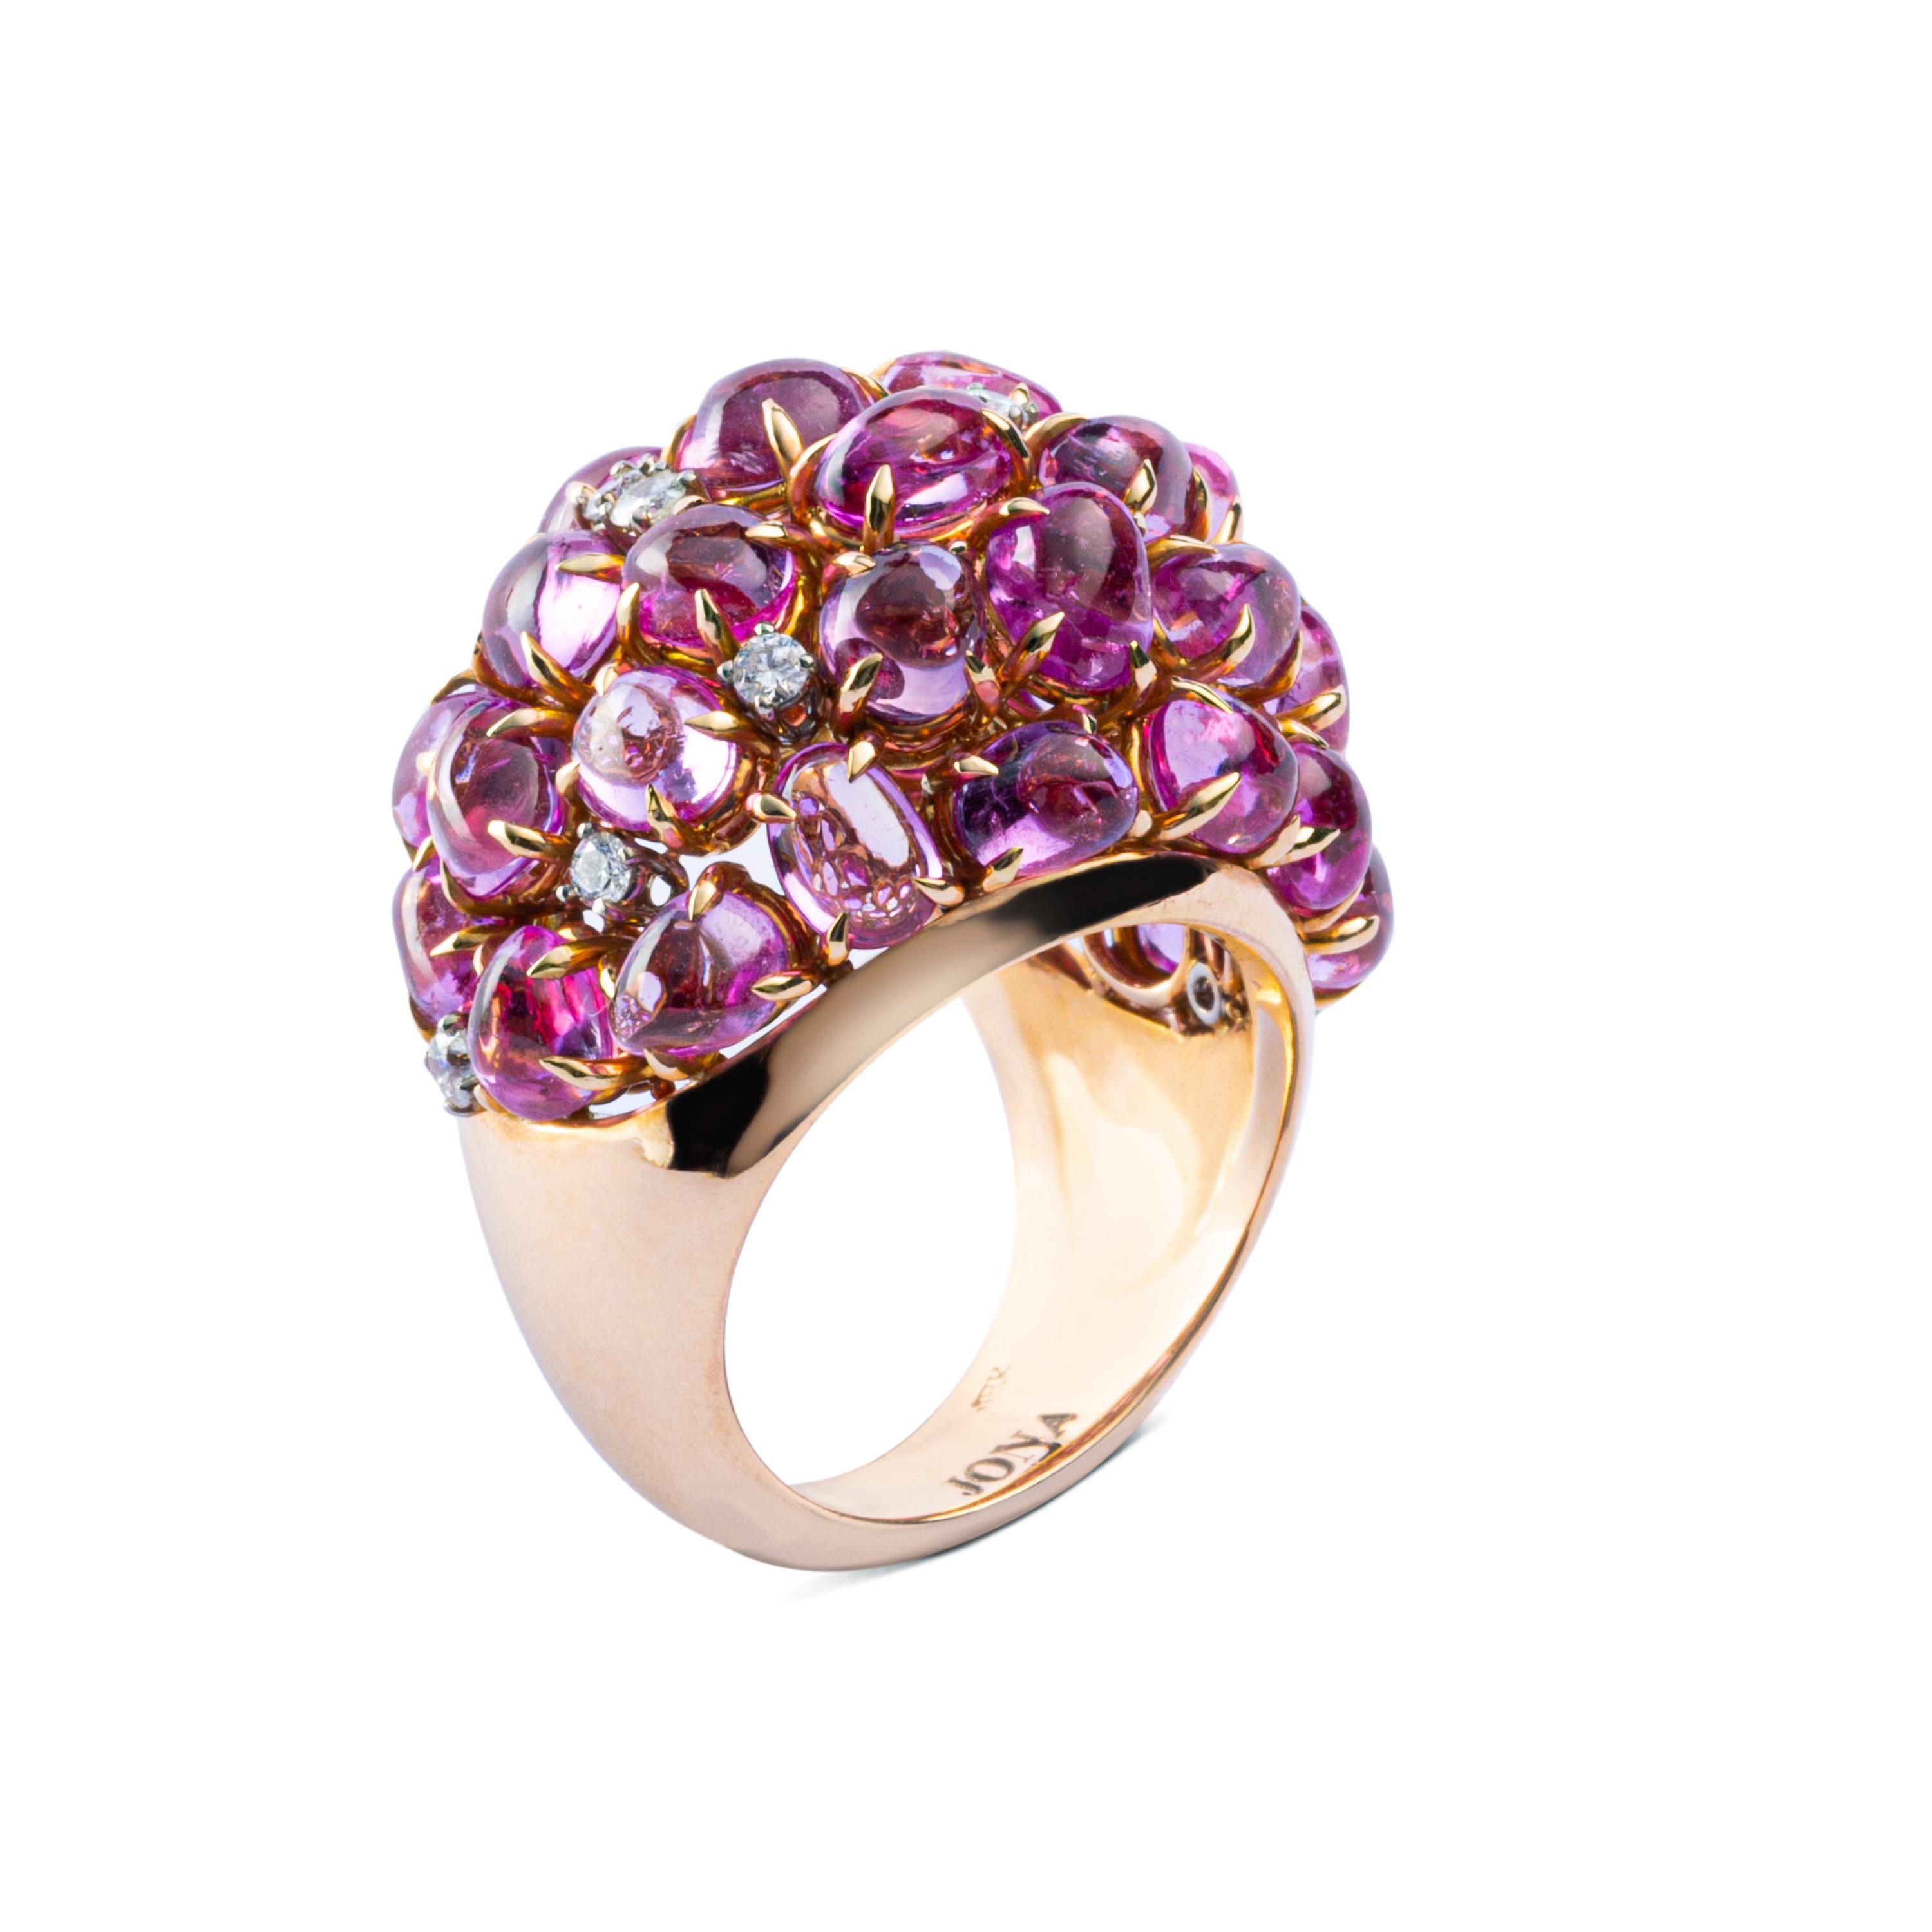 A uniquely hand crafted in Italy dome ring by Alex Jona, featuring 23,02 carats of cabochon cut pink sapphires of multiple shapes and sizes, 0.50 carats of brilliant cut diamonds set in 18K rose gold. Ring size US 6.5- EU 12. Can be sized to any